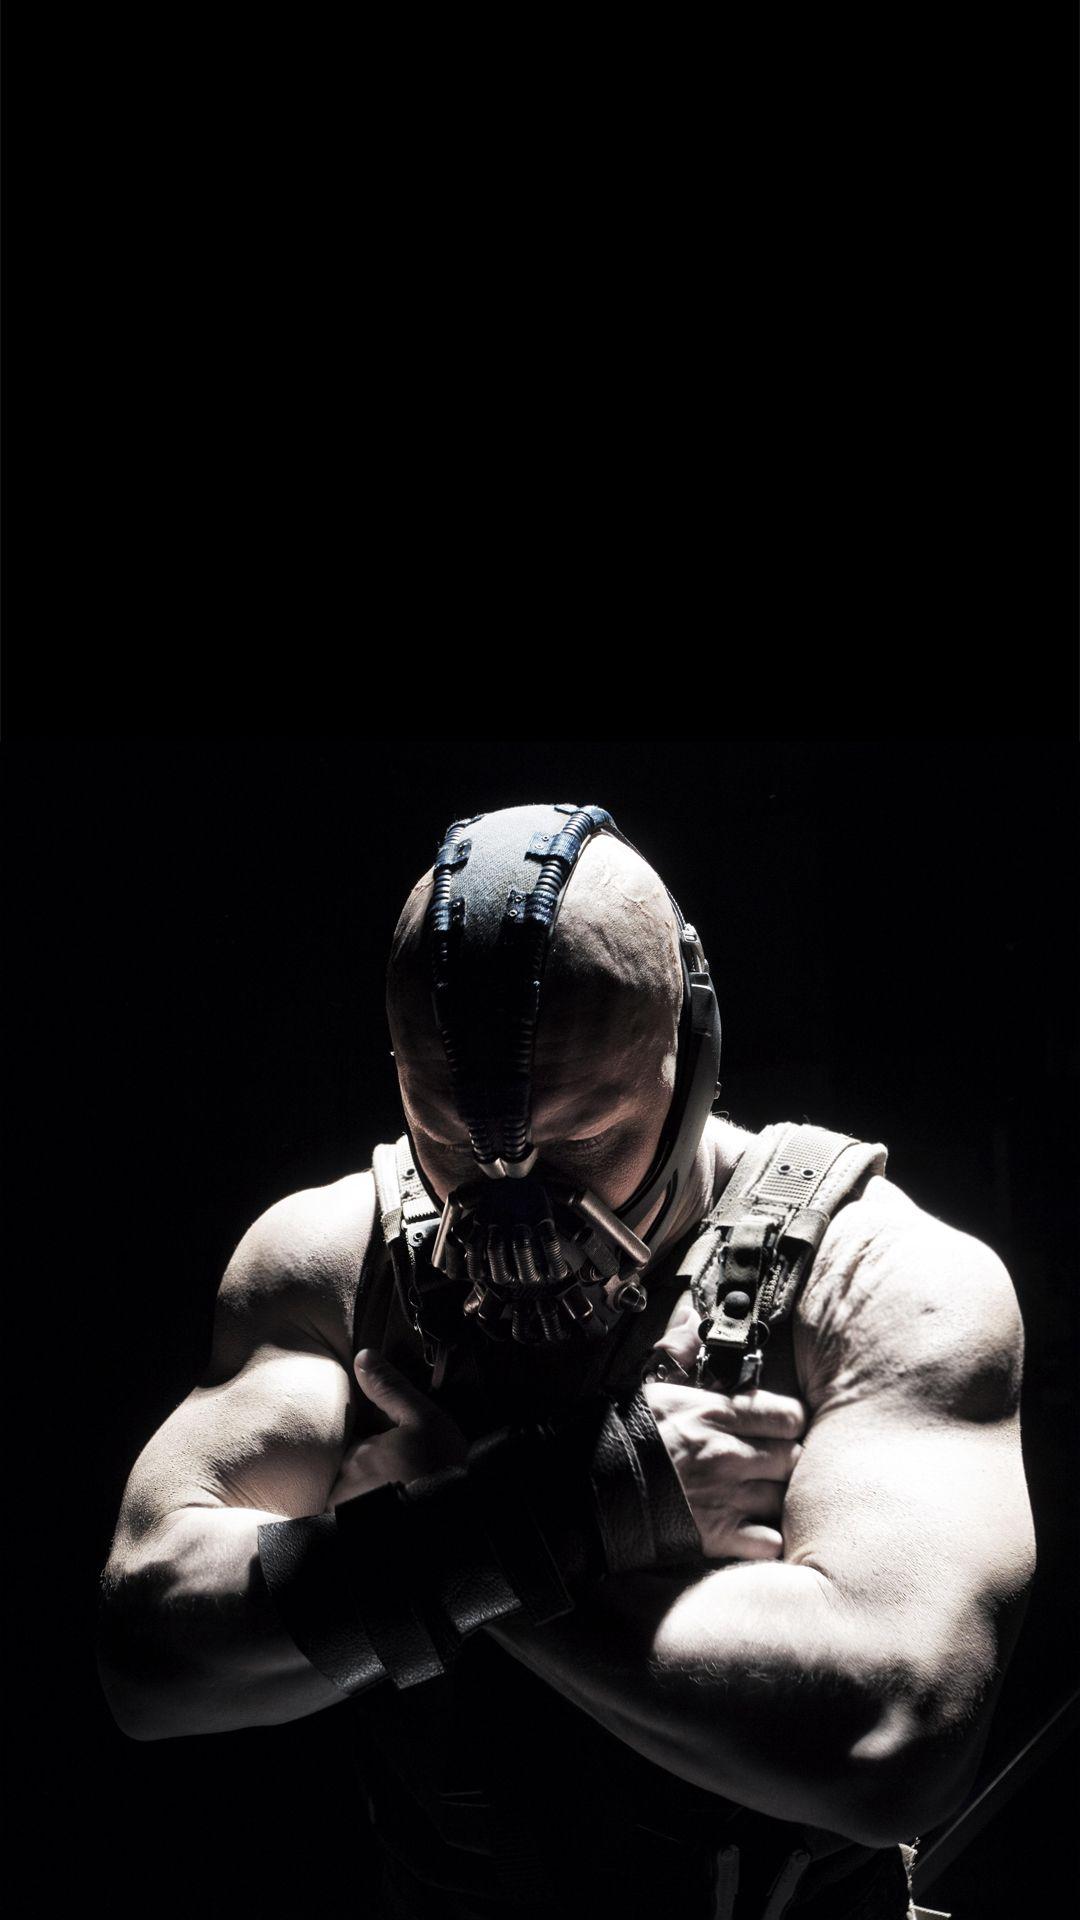 Bane The Dark Knight Rises htc one wallpaper, free and easy